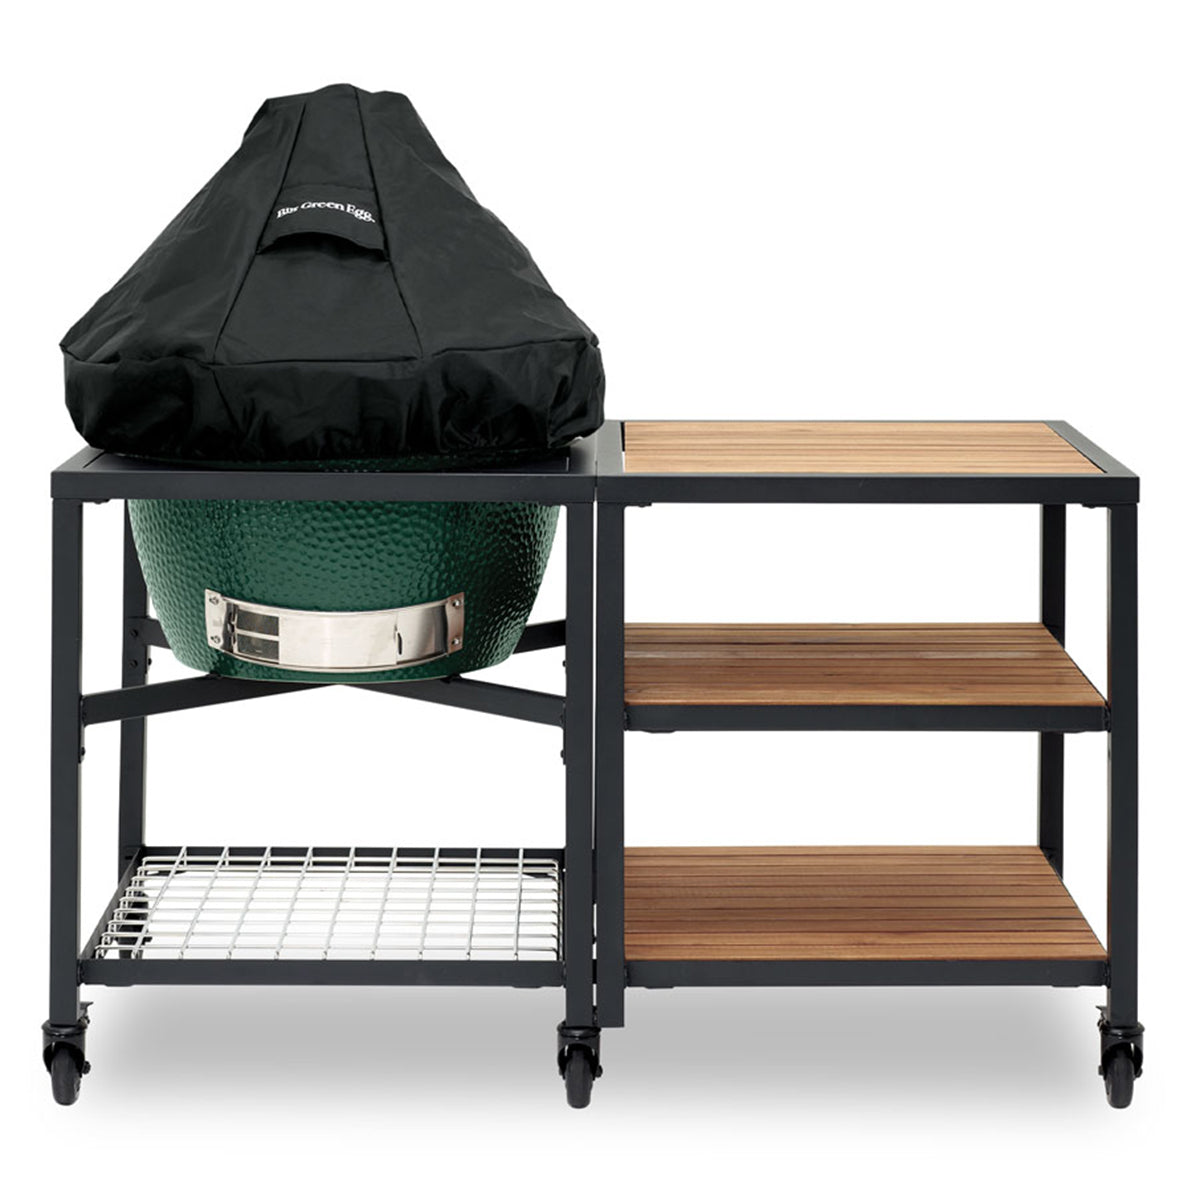 Cover Type F - Universal-Fit for Big Green Egg